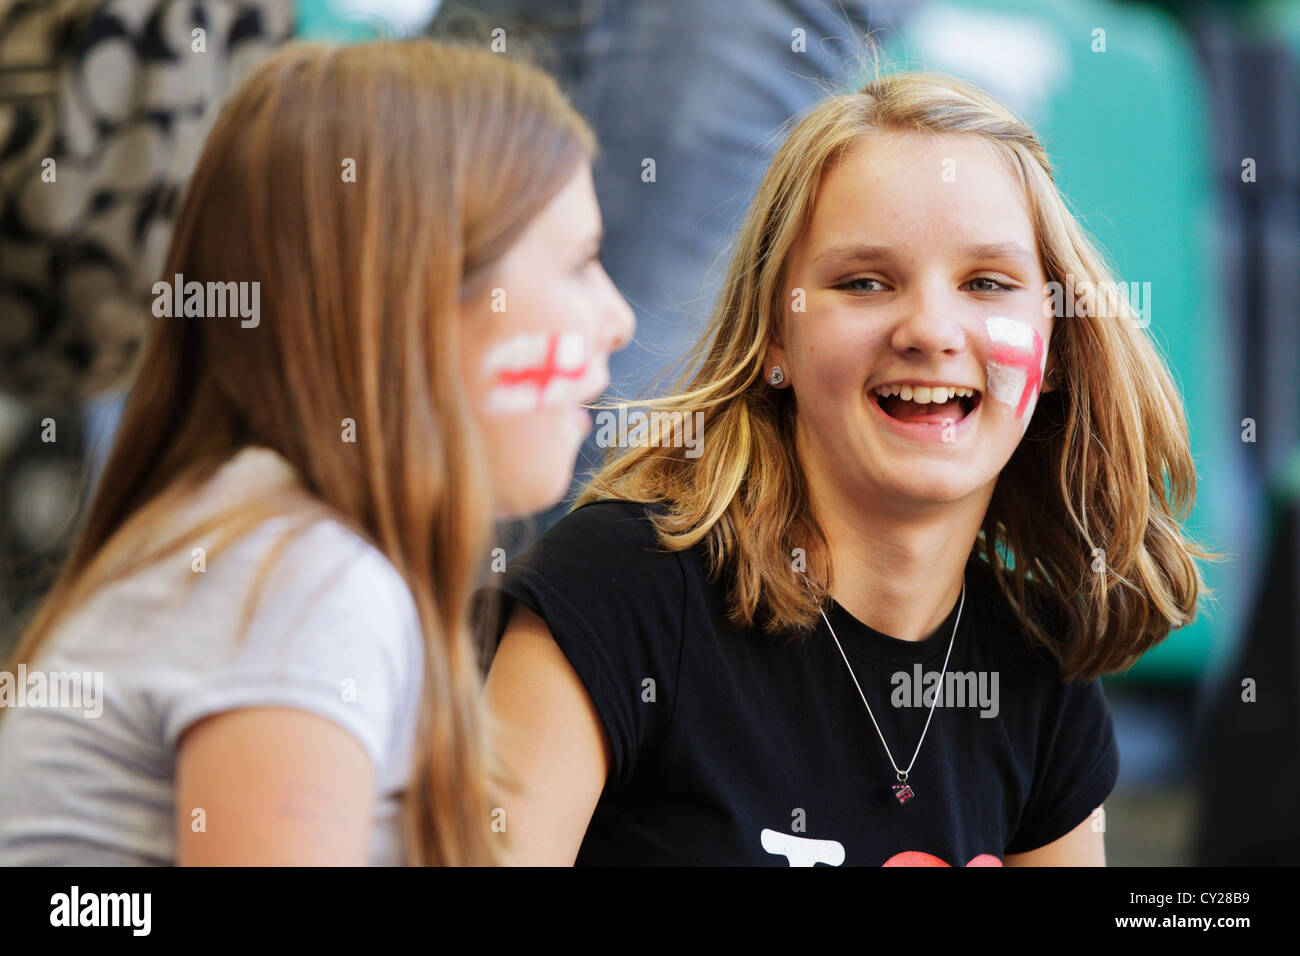 Young England supporters enjoy themselves in the stands at a FIFA Women's World Cup Group B match between England and Mexico. Stock Photo